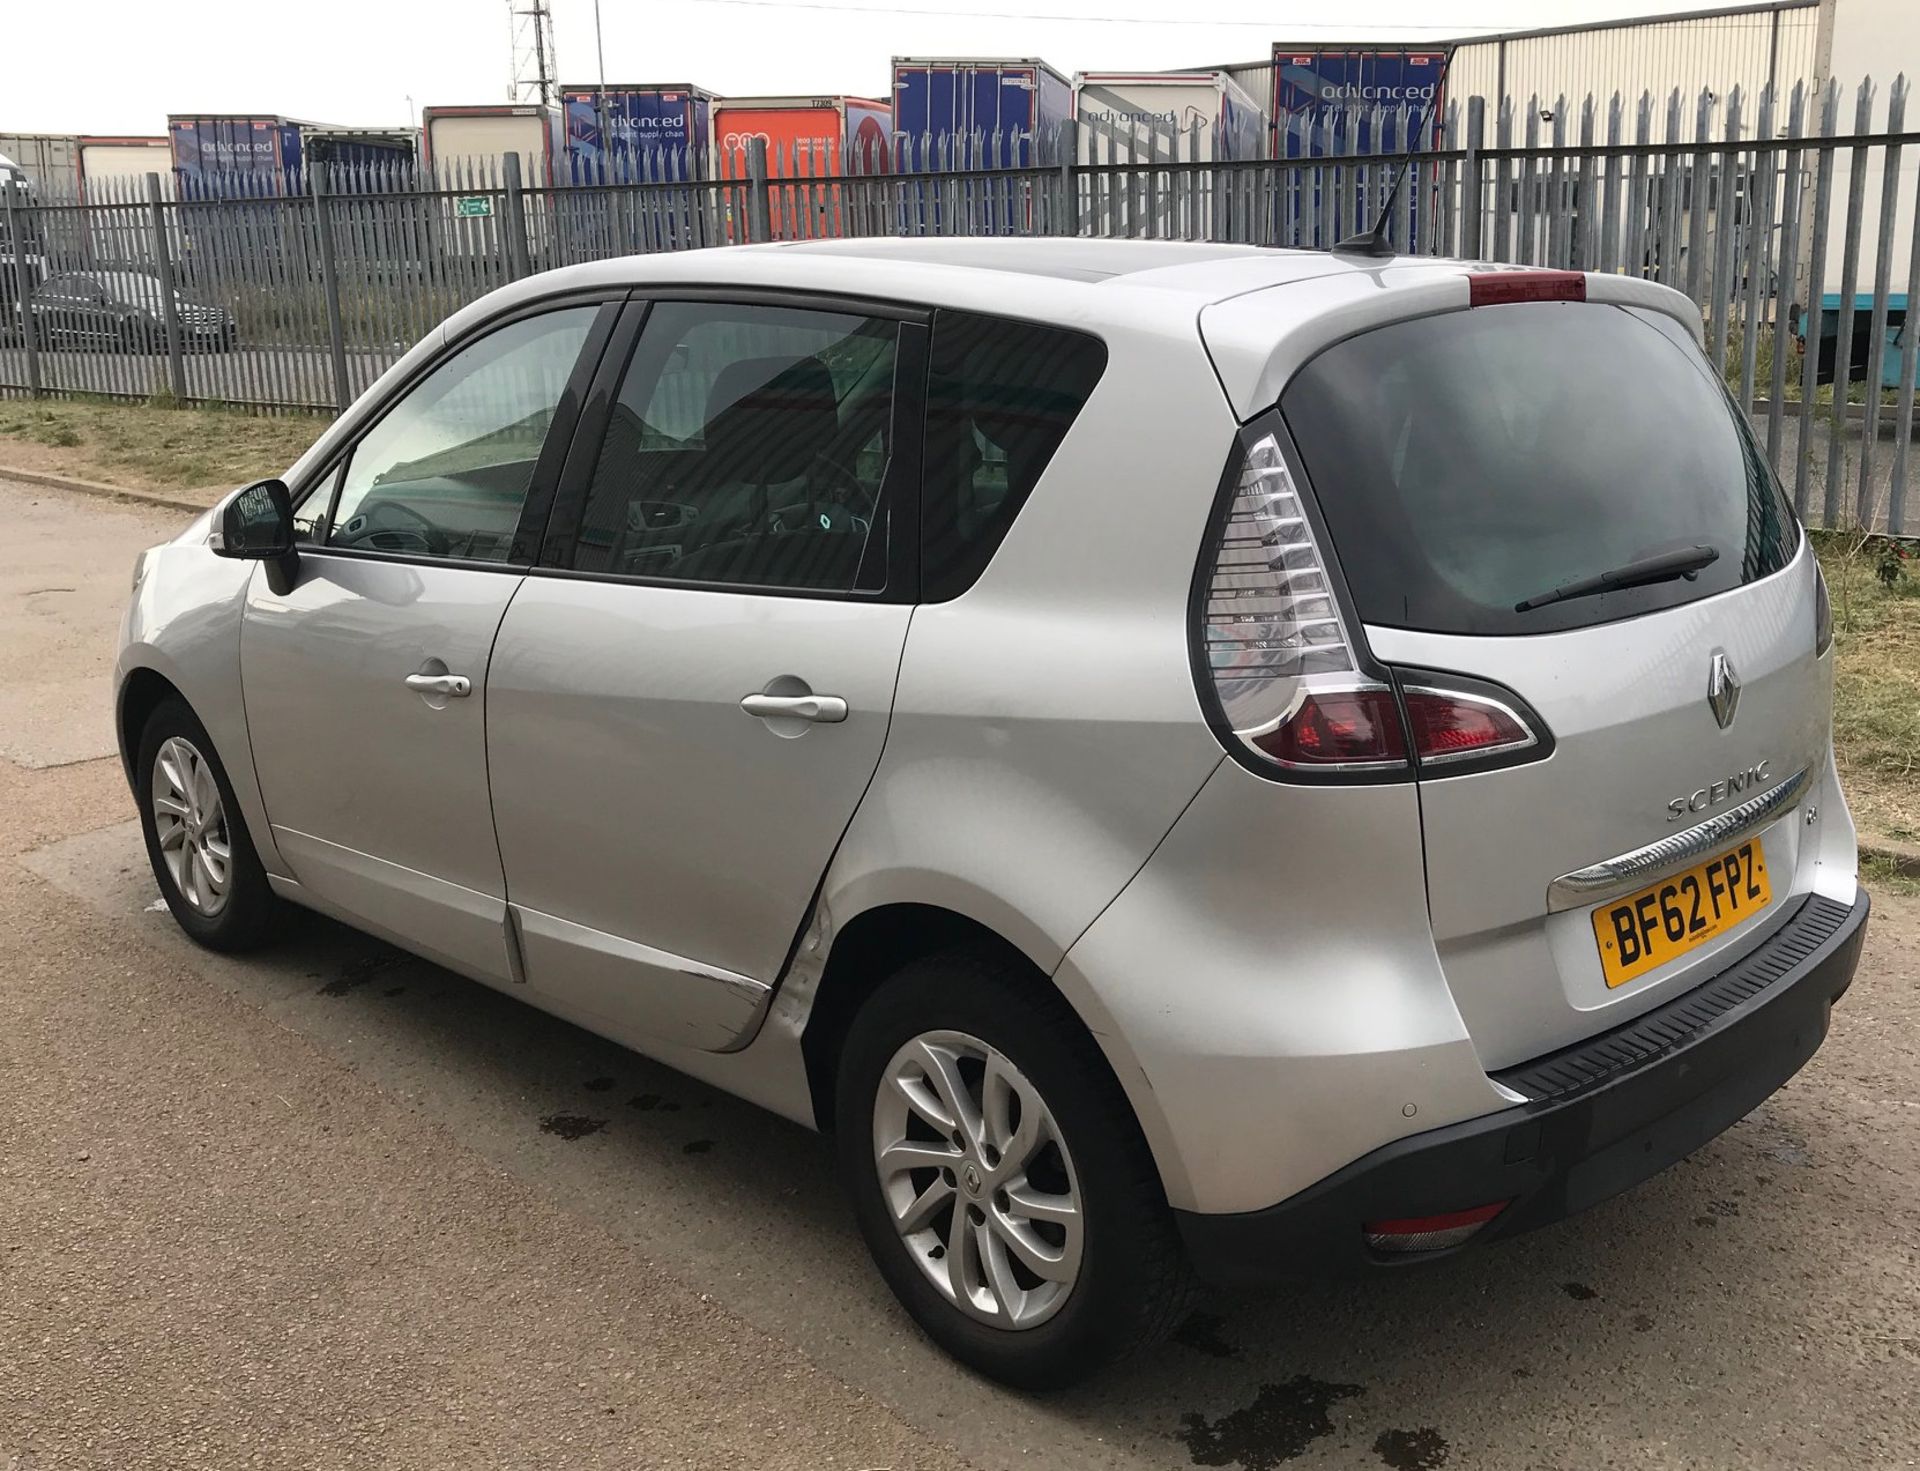 2012 Renault Scenic 1.5 Dci D-Que Tt Energy 5 Dr MPV - CL505 - NO VAT ON THE HAMMER - Location: Corb - Image 14 of 15